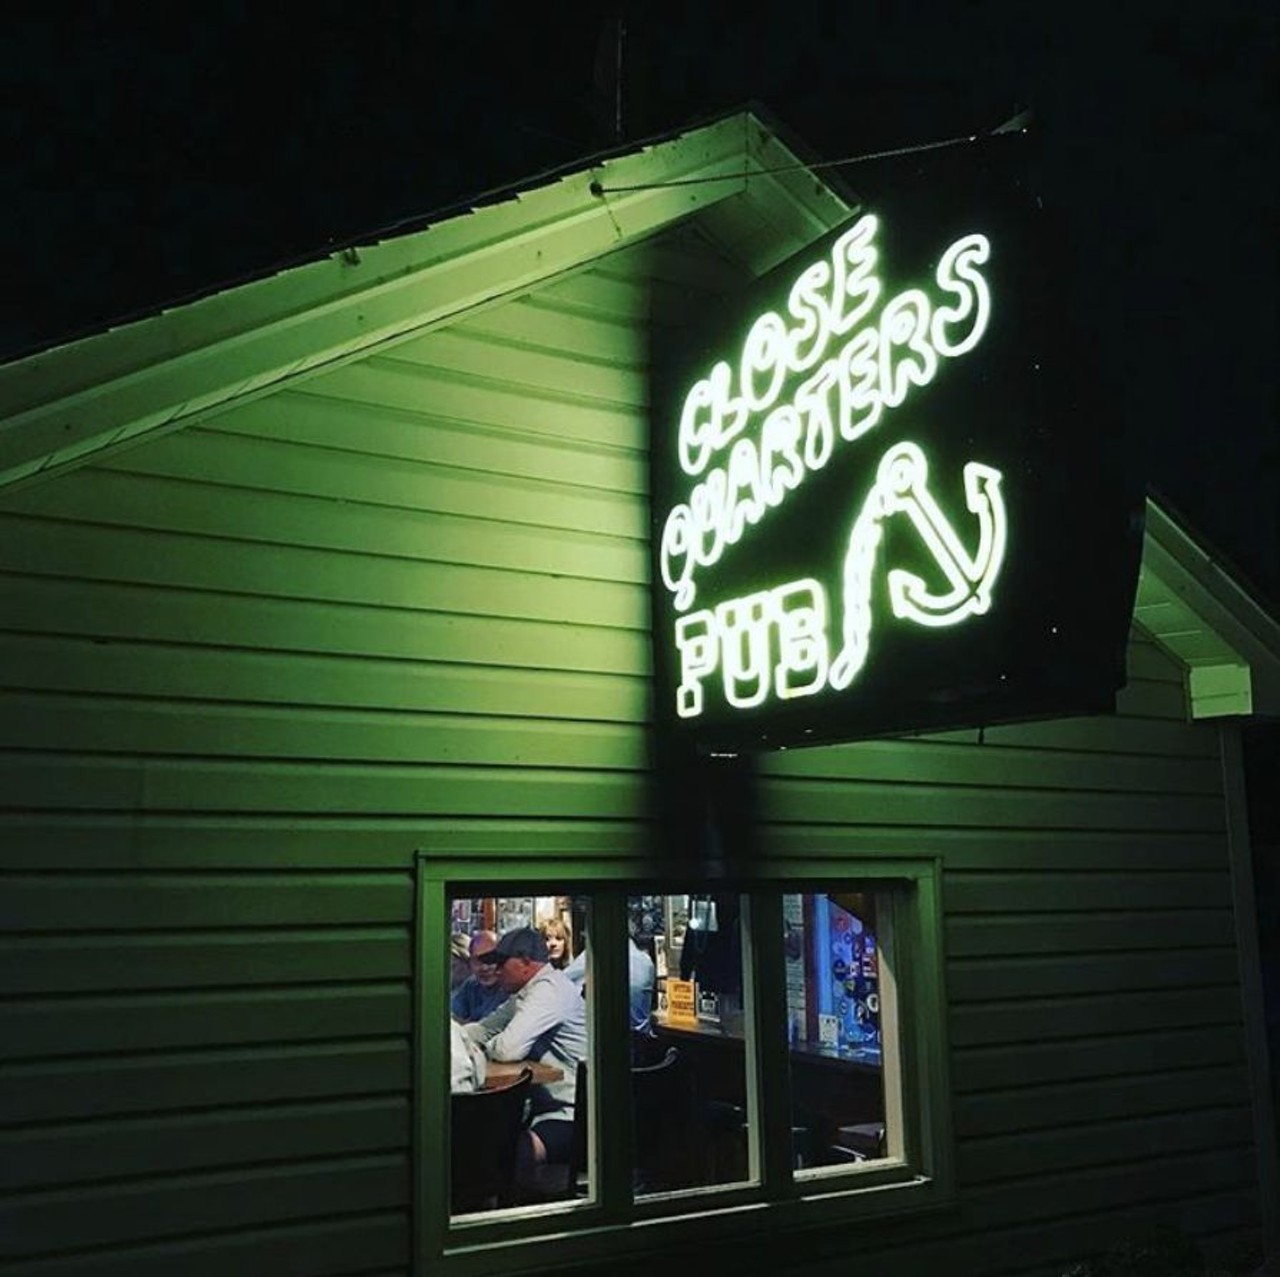  Close Quarters Pub
31953 Lake Rd., Avon Lake, 440-933-5217
Get to know your neighbor at this tiny (and we mean incredibly small) Avon Lake dive. Classic bar food and kitschy decorations complete the experience. 
Photo via  markcavitt/Instagram